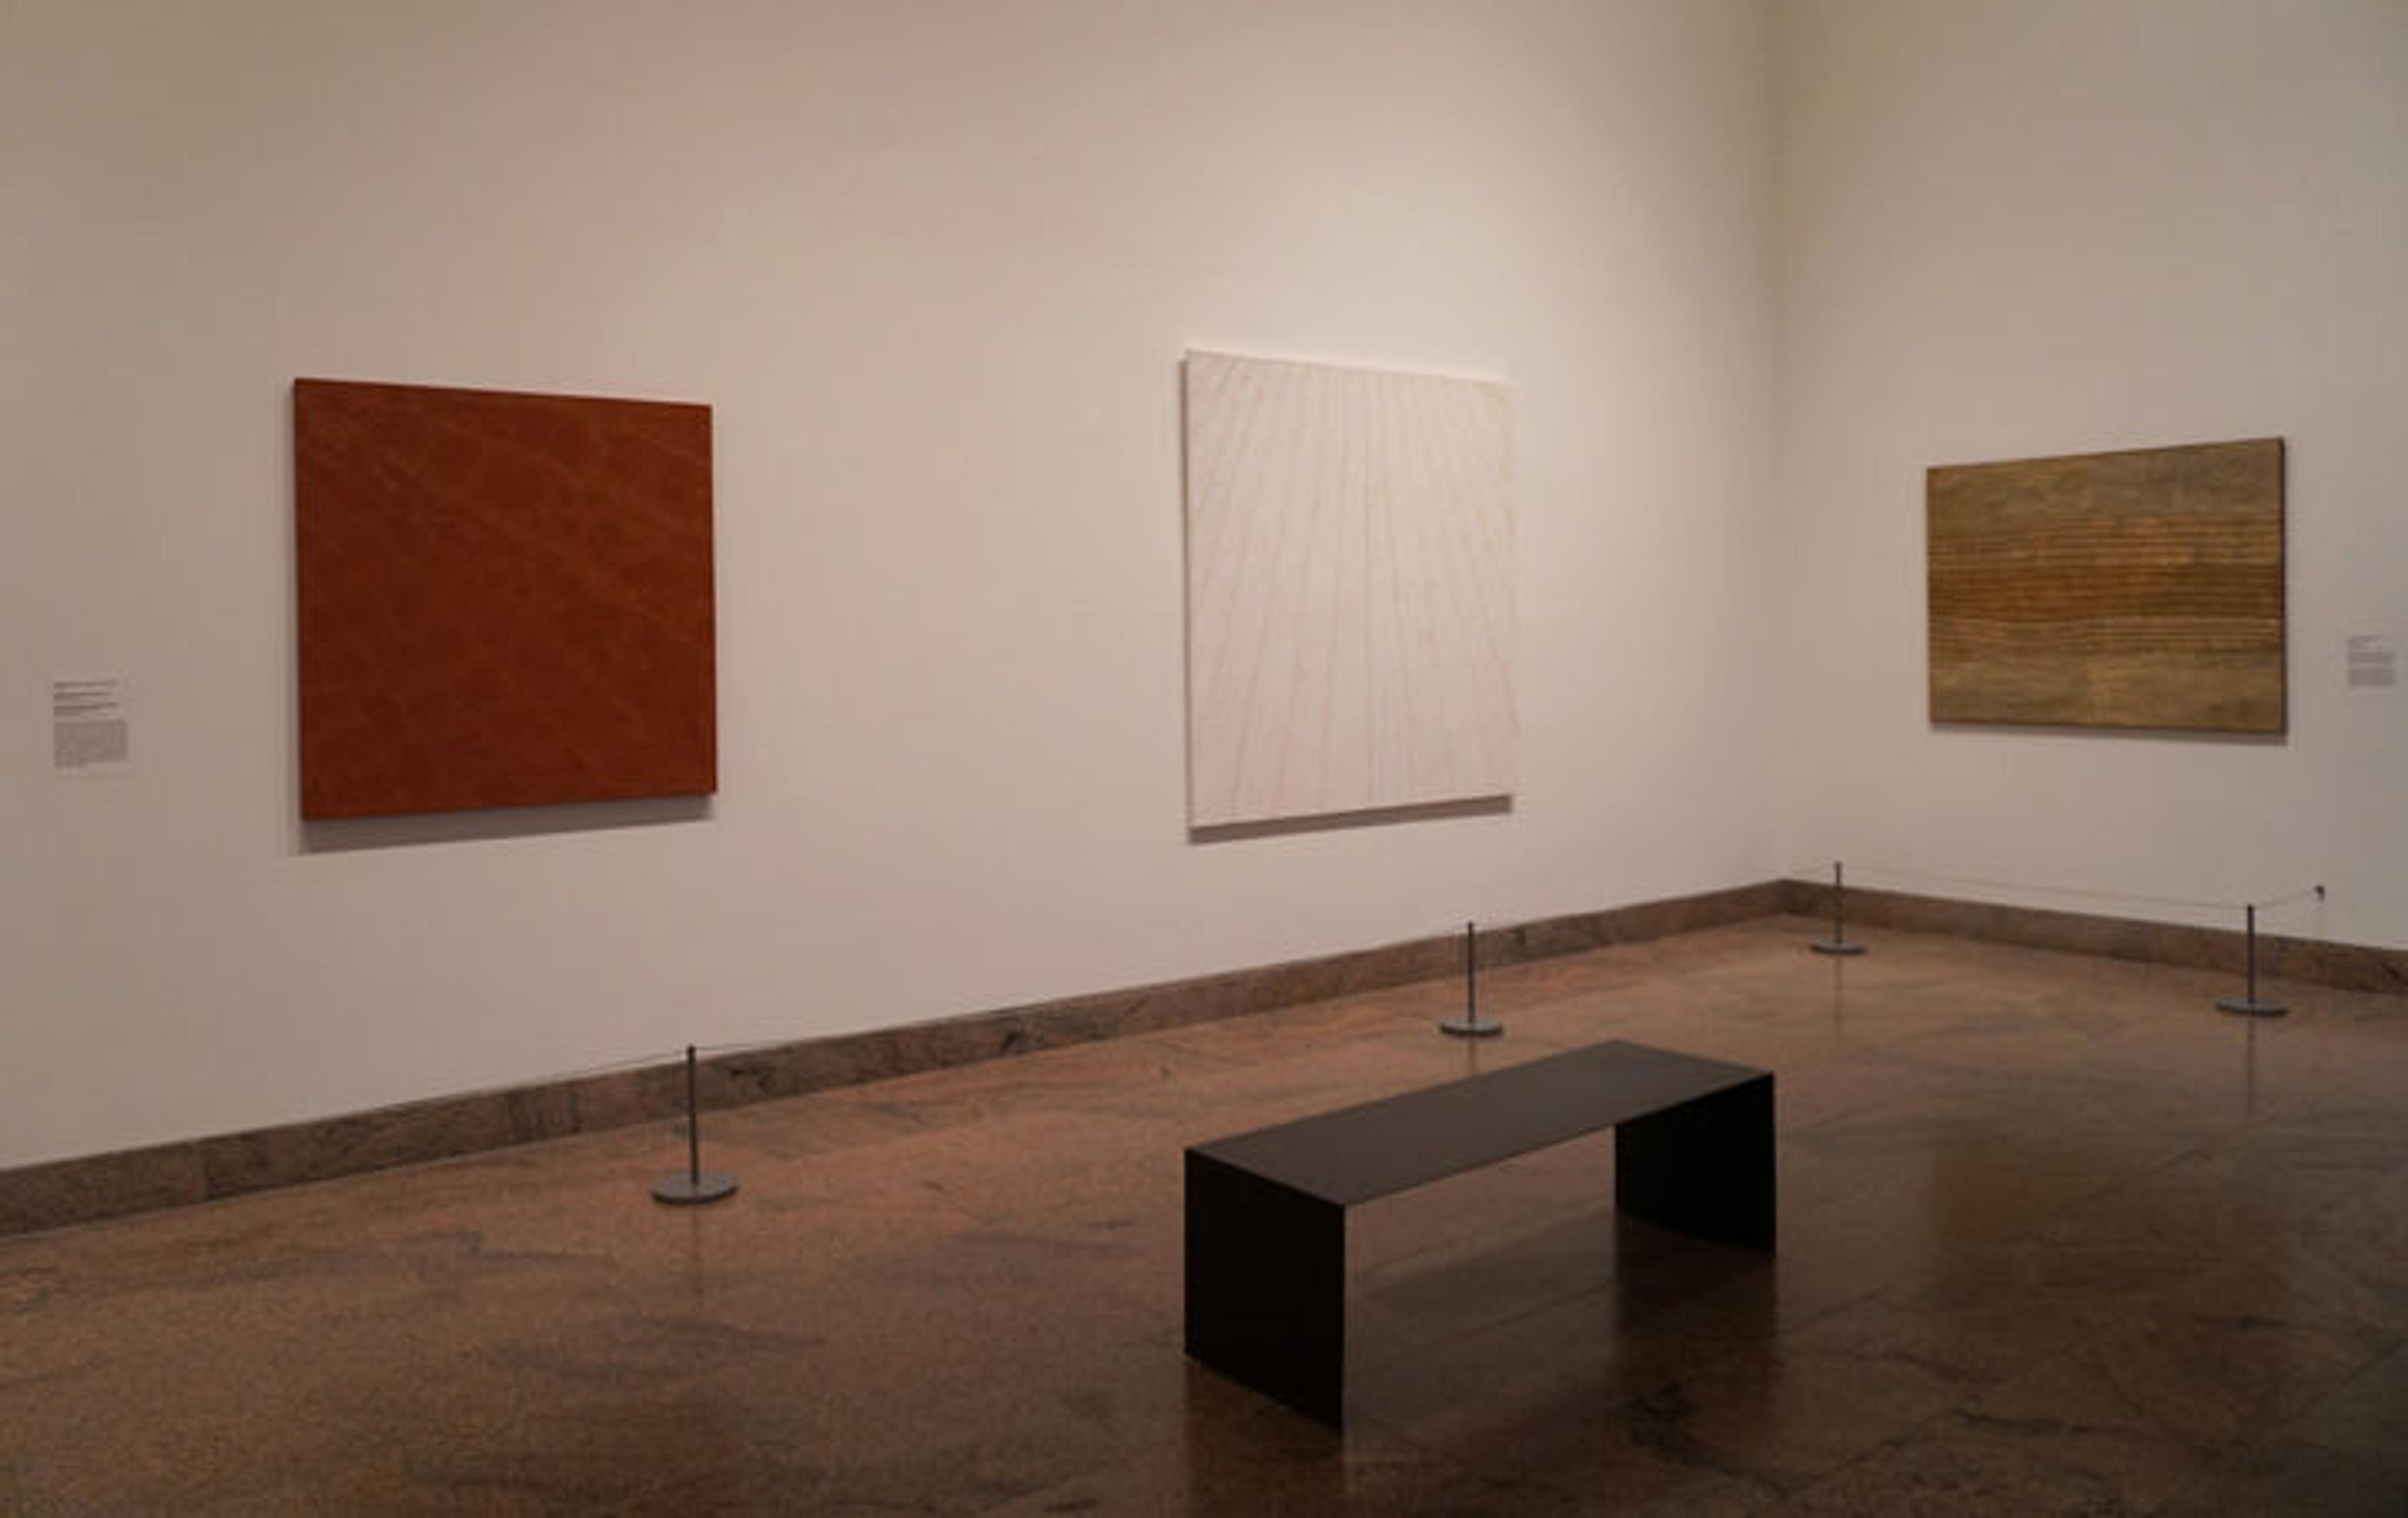 Installation view of three paintings in an exhibition gallery